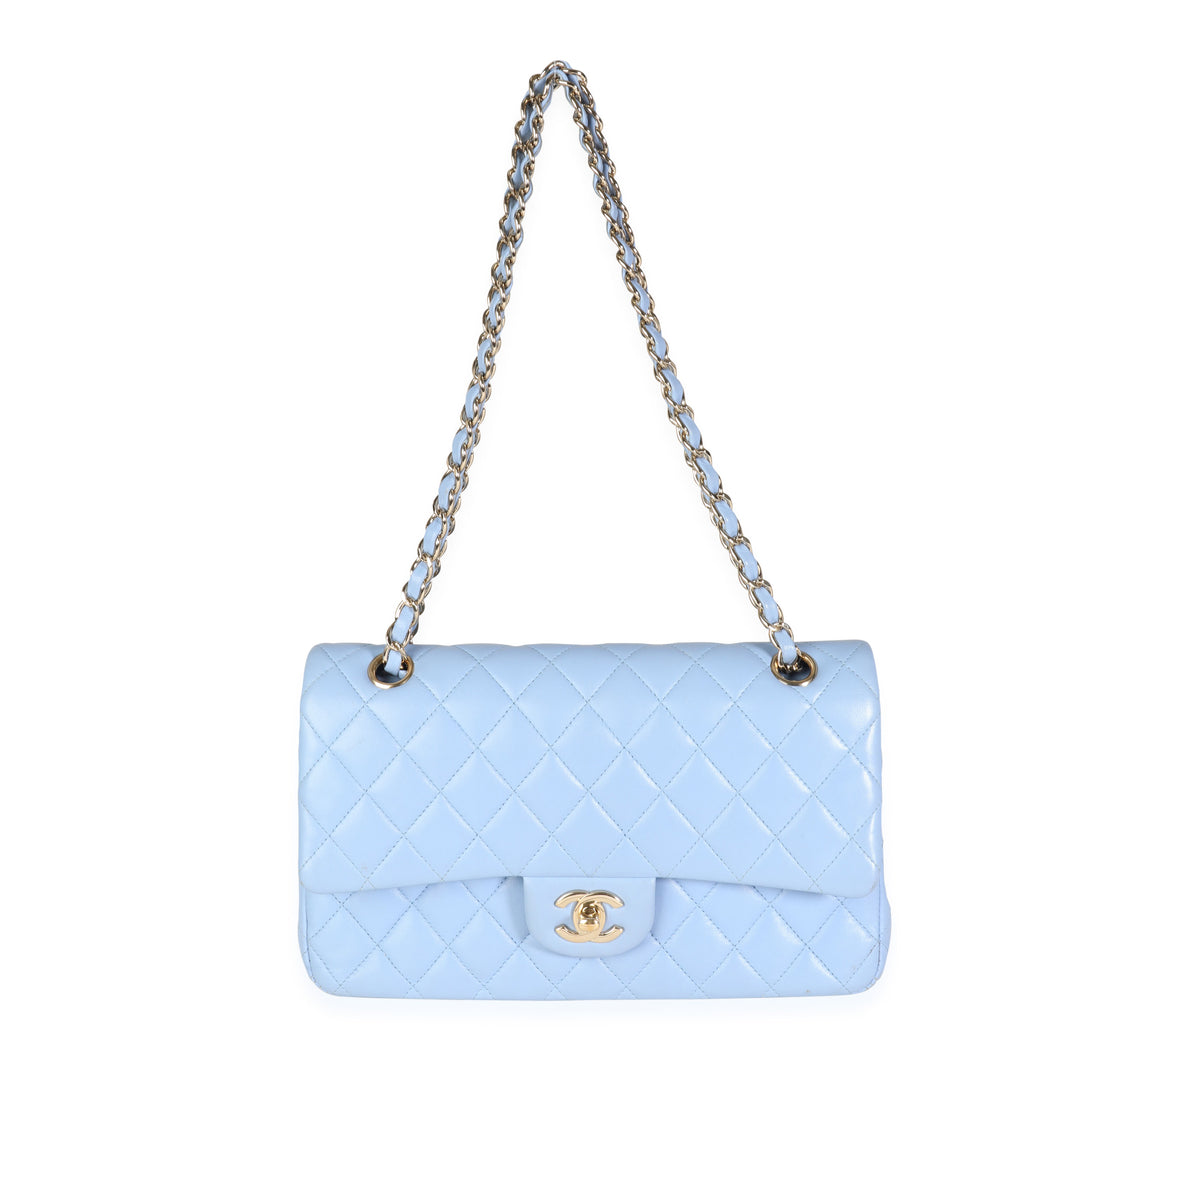 Chanel Periwinkle Caviar Leather Medium Classic Flap Bag at